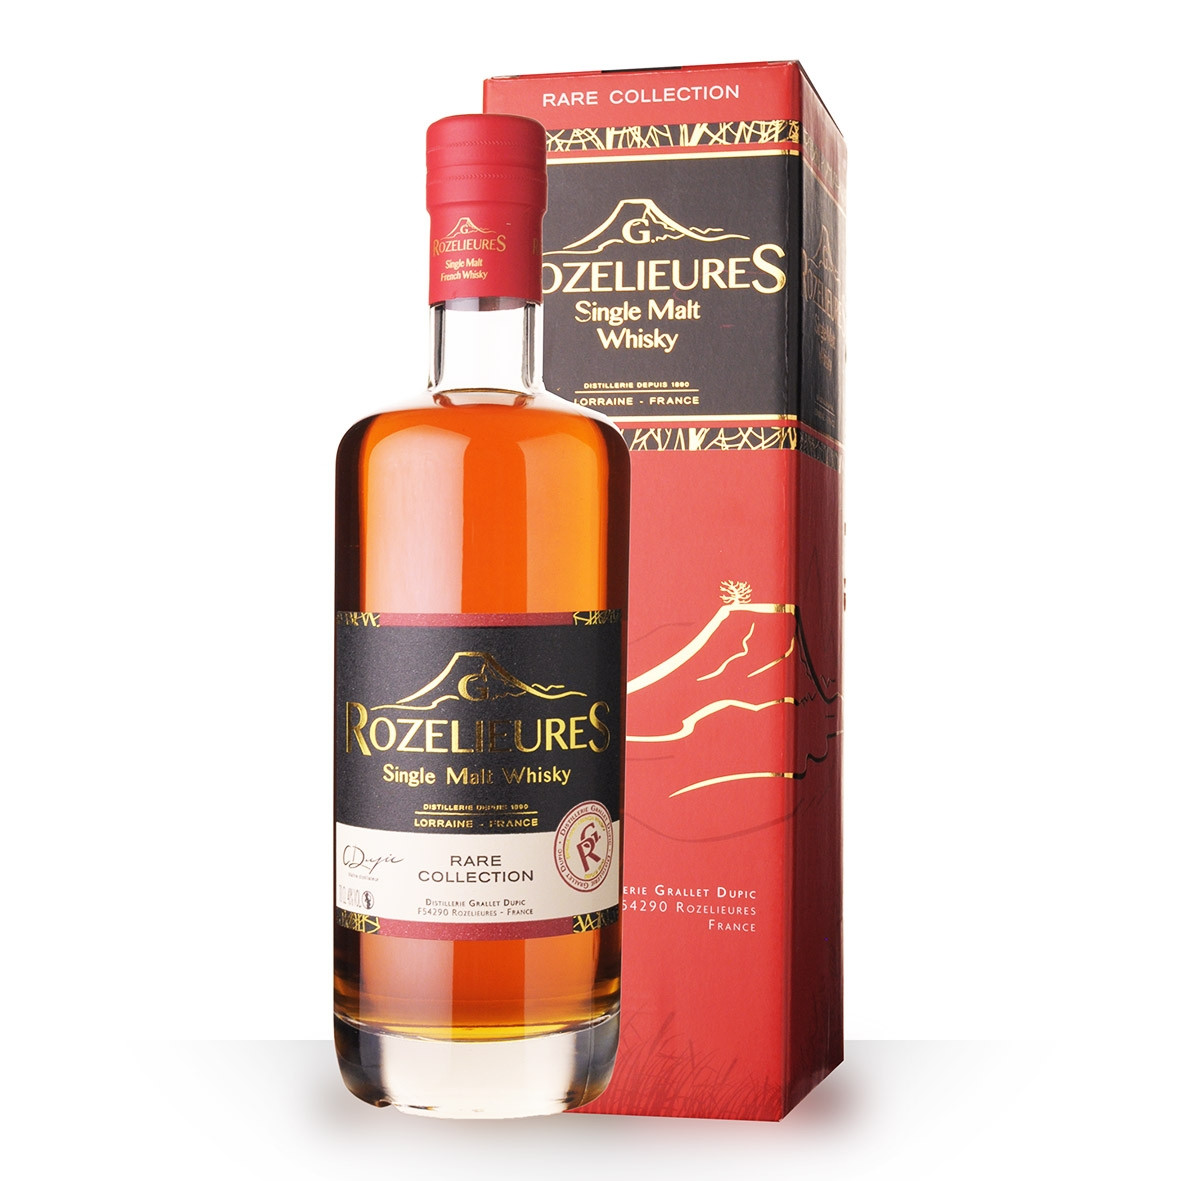 Whisky Rozelieures Rare Collection 70cl Etui www.odyssee-vins.com